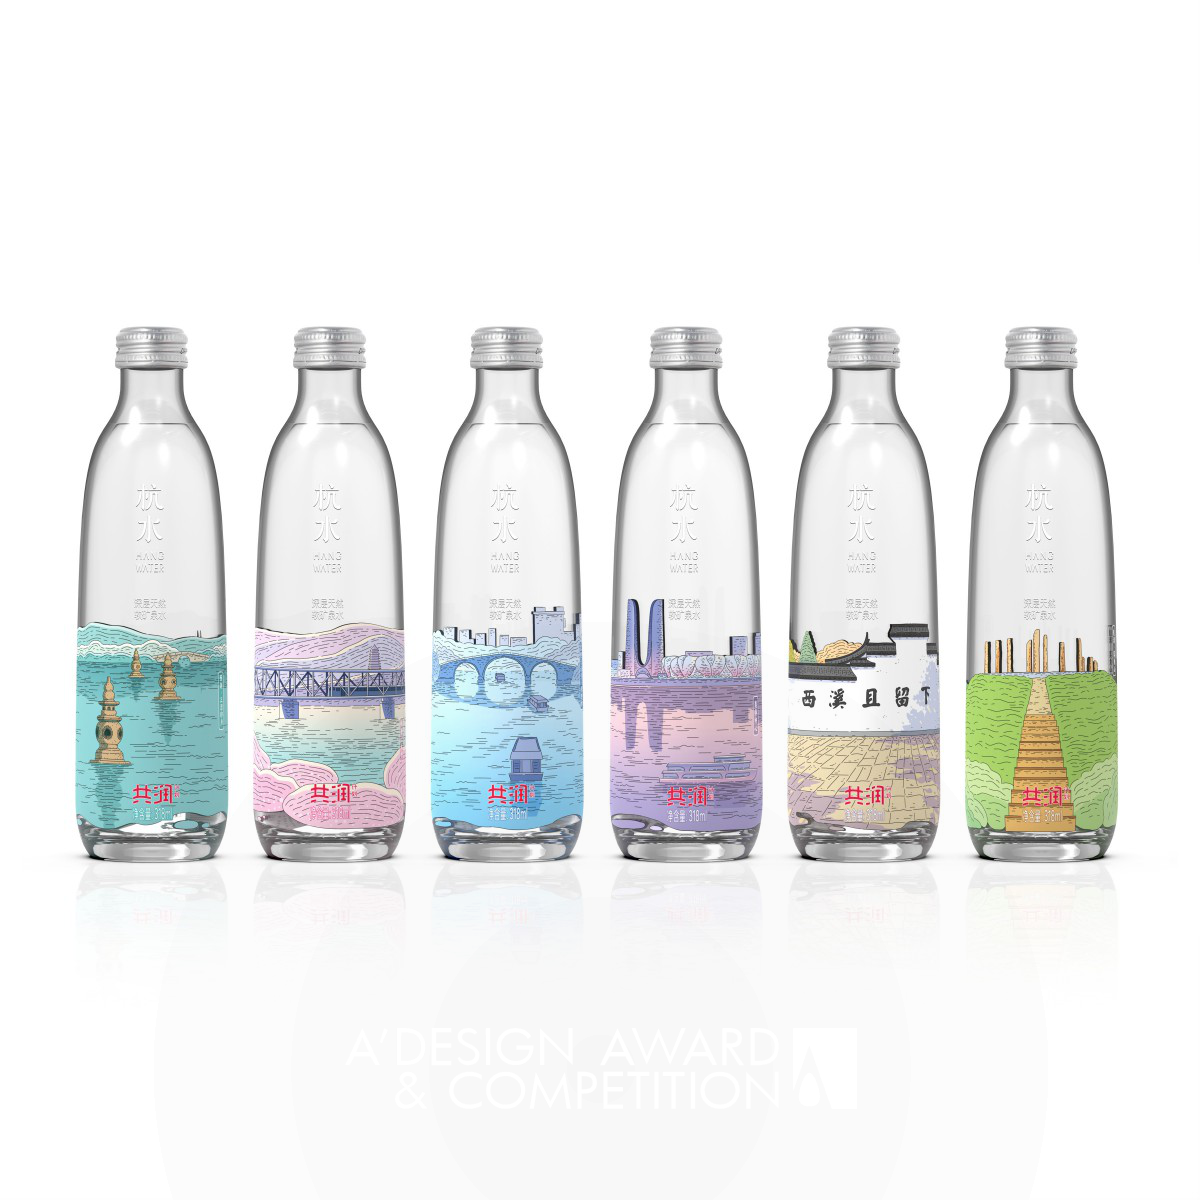  Mineral Water Packaging